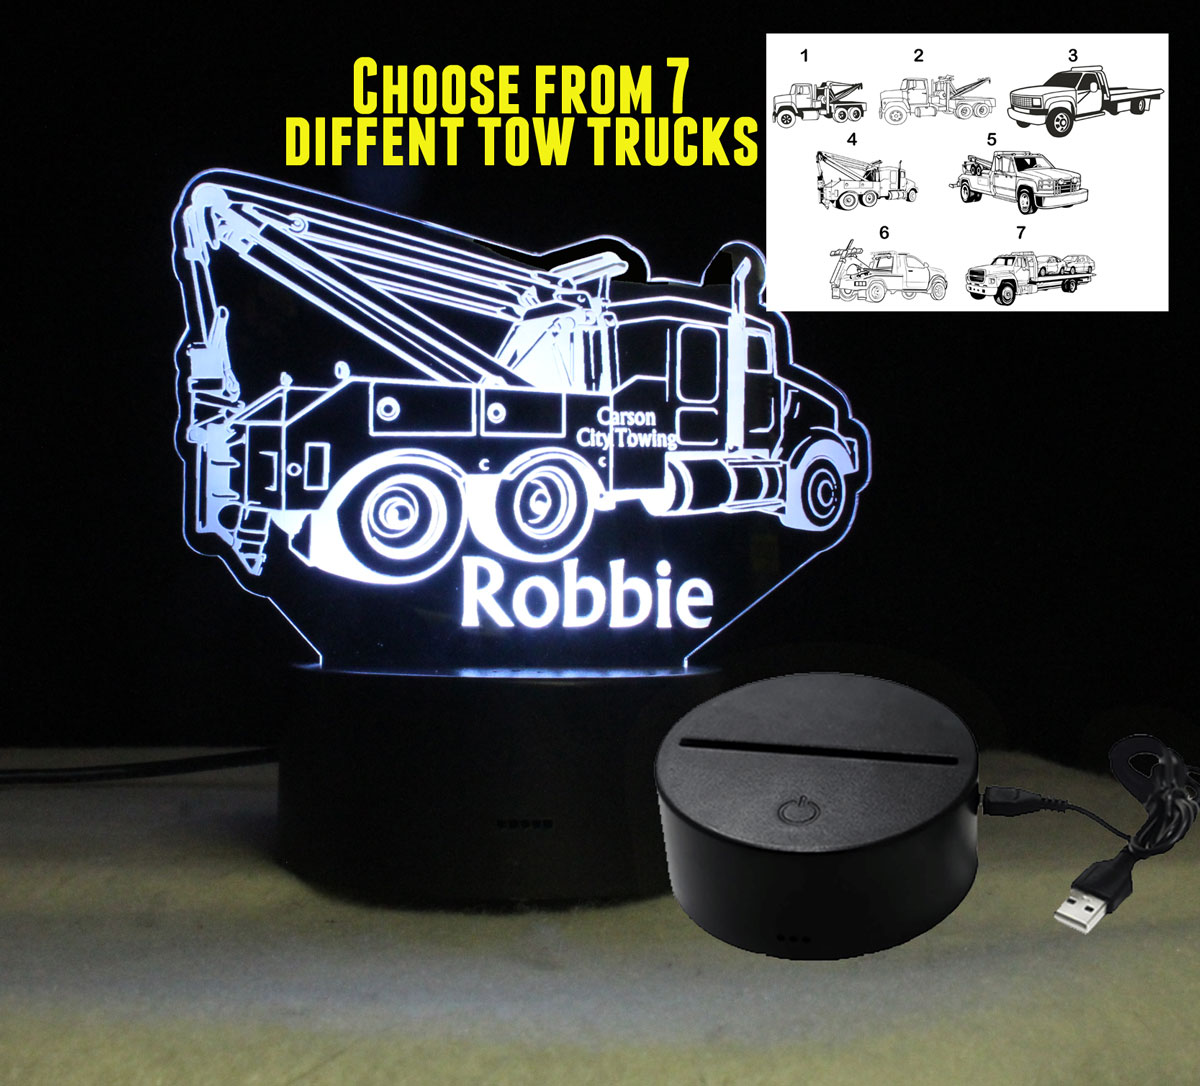 Customizable Personalized Tow Truck night light LED, USB/110V/240V battery operated